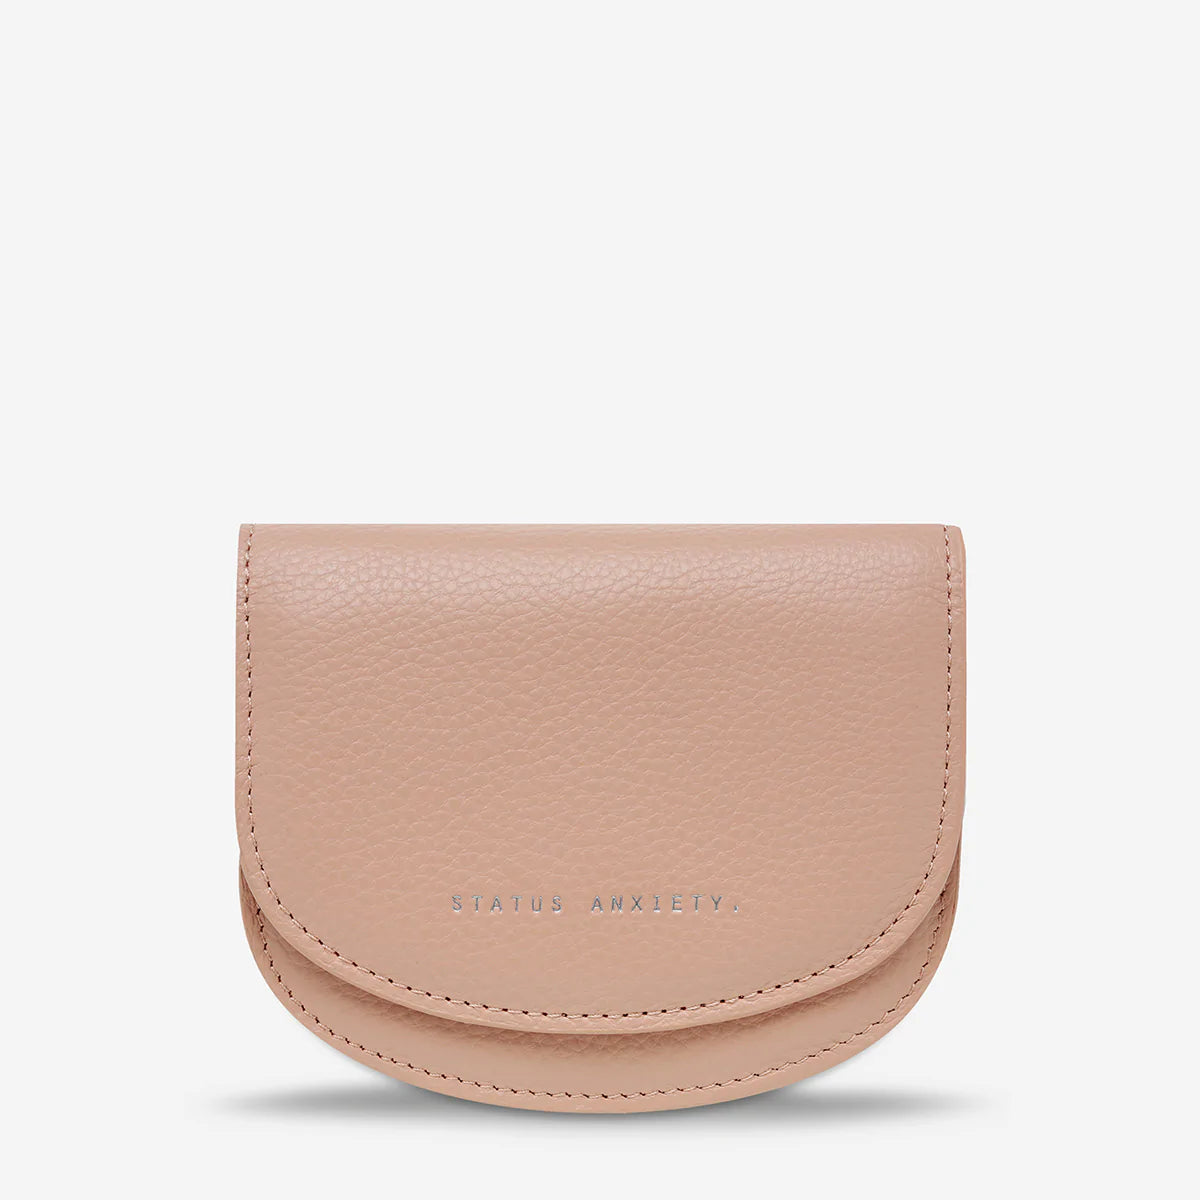 Status Anxiety | Us For Now Wallet - Found My Way Invercargill